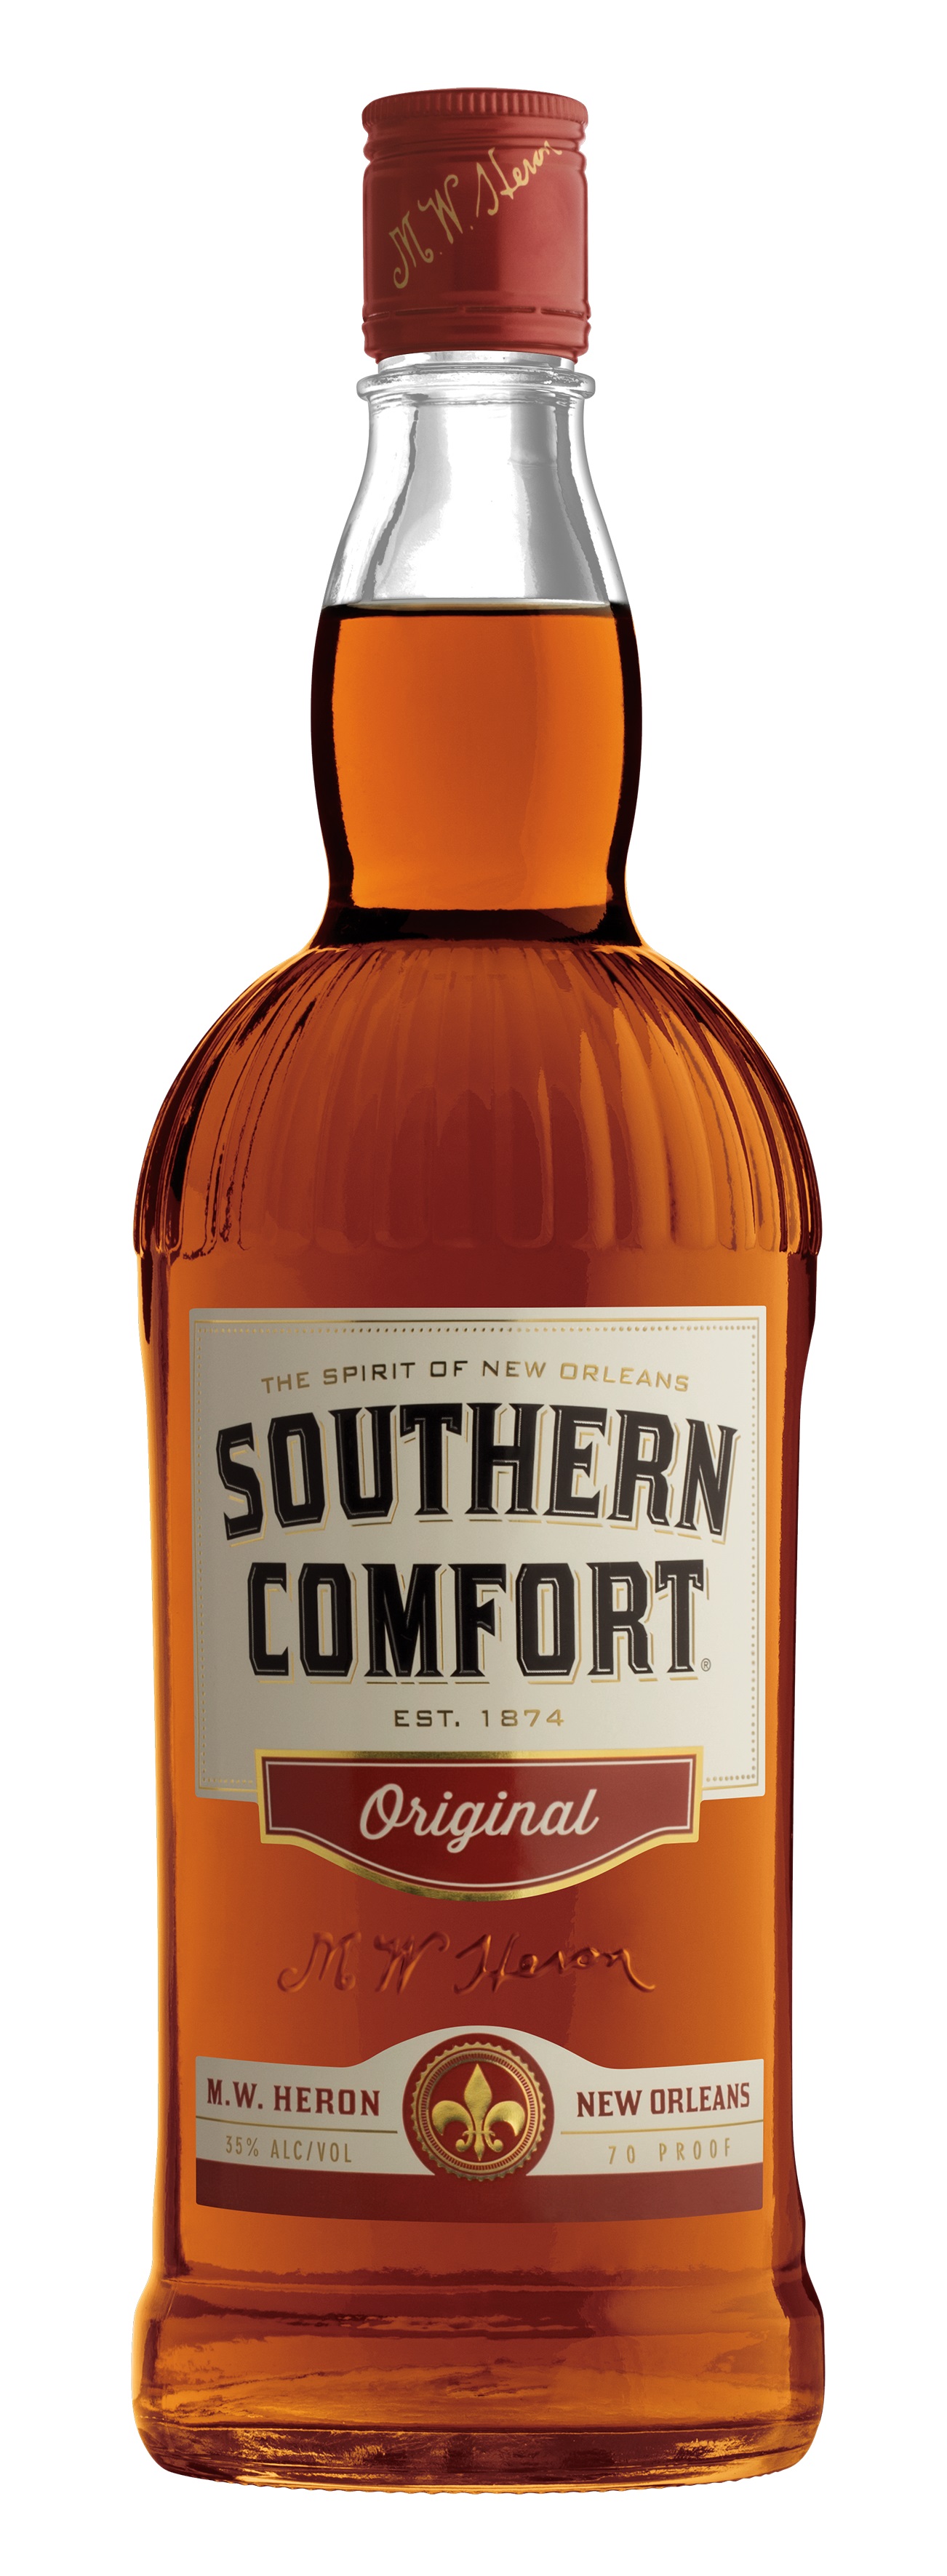 17997 Southern comfort whisky 1ltr.